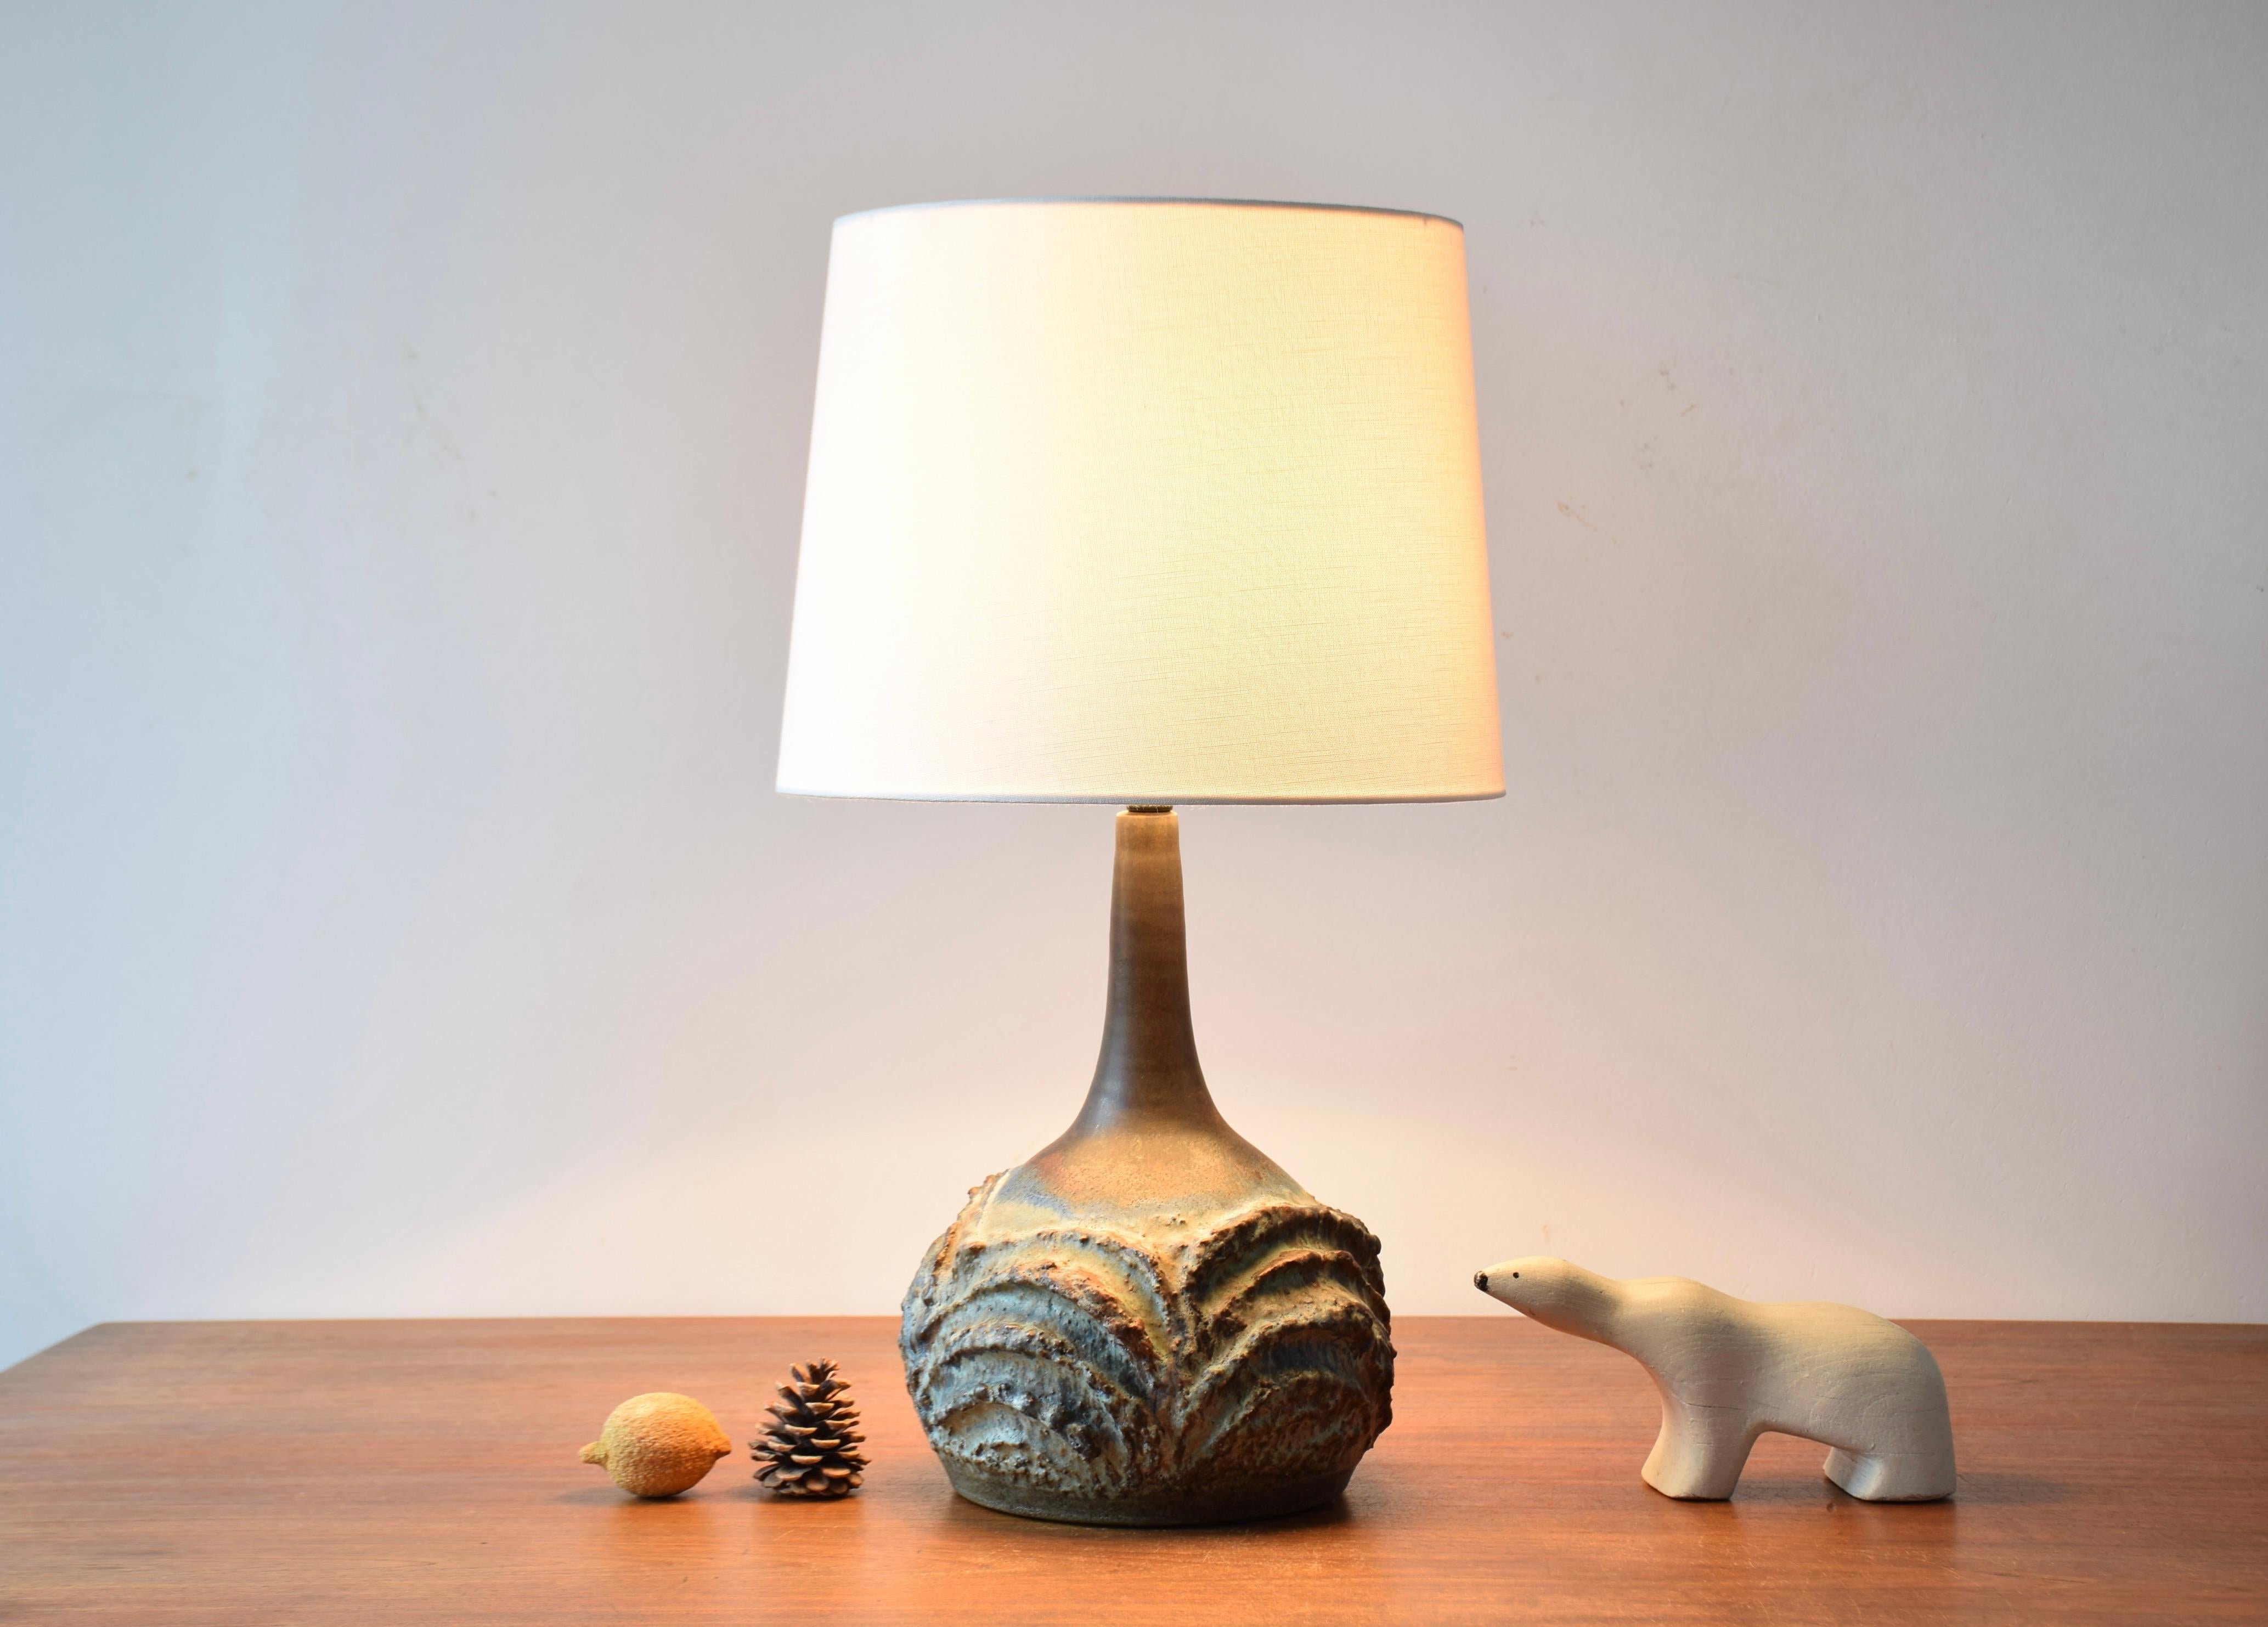 Danish Modern brutalist ceramic table lamp by Judi Kunst. Made ca. 1970s.

Judi Kunst was run by Judith and Iver Christensen and located at Kelstrup Strand close to Haderslev in Jutland.

The colors are a mix of brown and blue shades.

Included is a